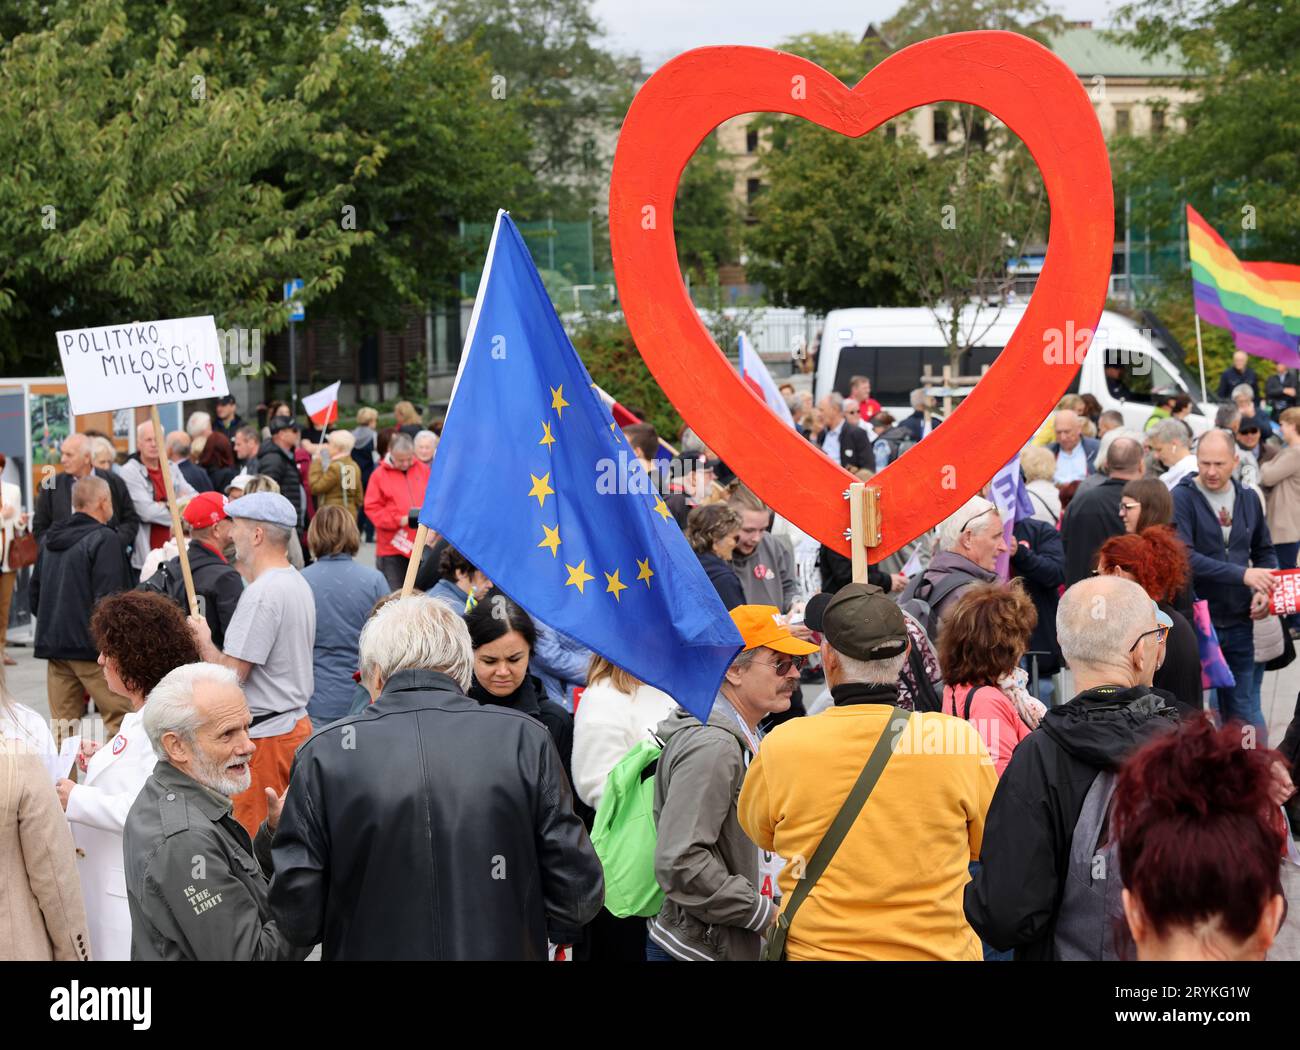 Cracow, Poland - October 1, 2023: Million Hearts March in Krakow. Crowds of Poles march through the streets of Krakow protesting against PiS's rule Stock Photo